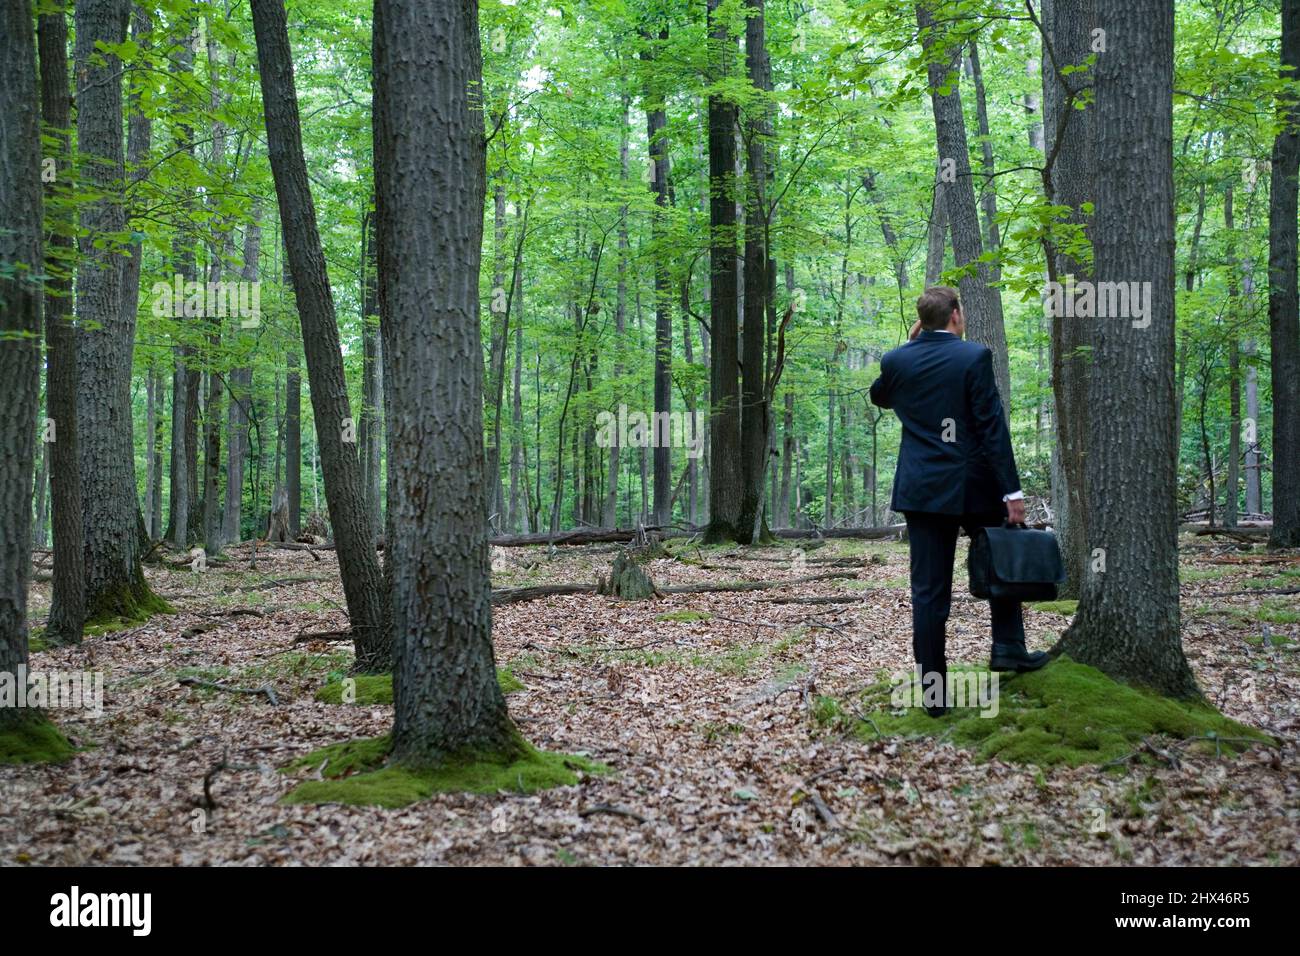 YOUNG BUSINESSMAN WITH CELLULAR MOBILE PHONE STANDING IN TEMPERATE MIXED NORTHERN FOREST Stock Photo